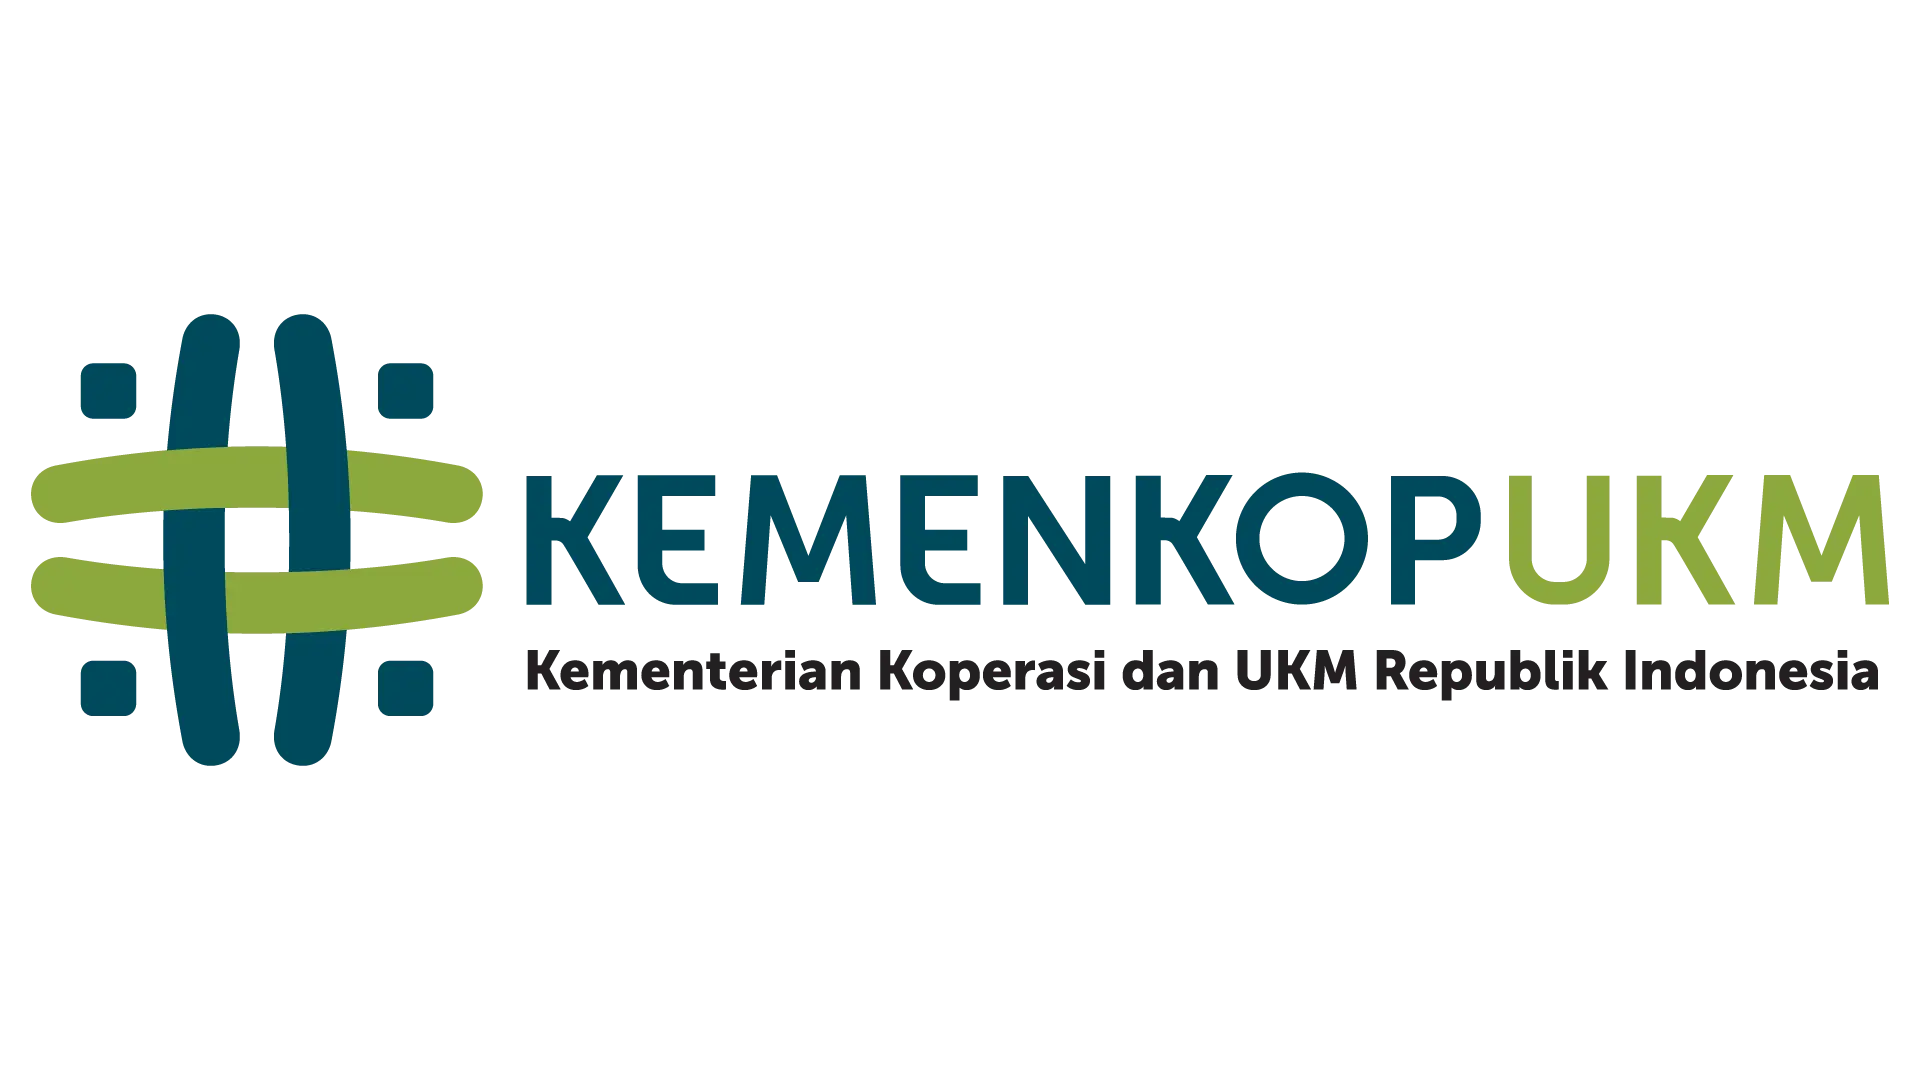 Chatbot owned by the Ministry of Cooperatives and Small and Medium Enterprises of the Republic of Indonesia